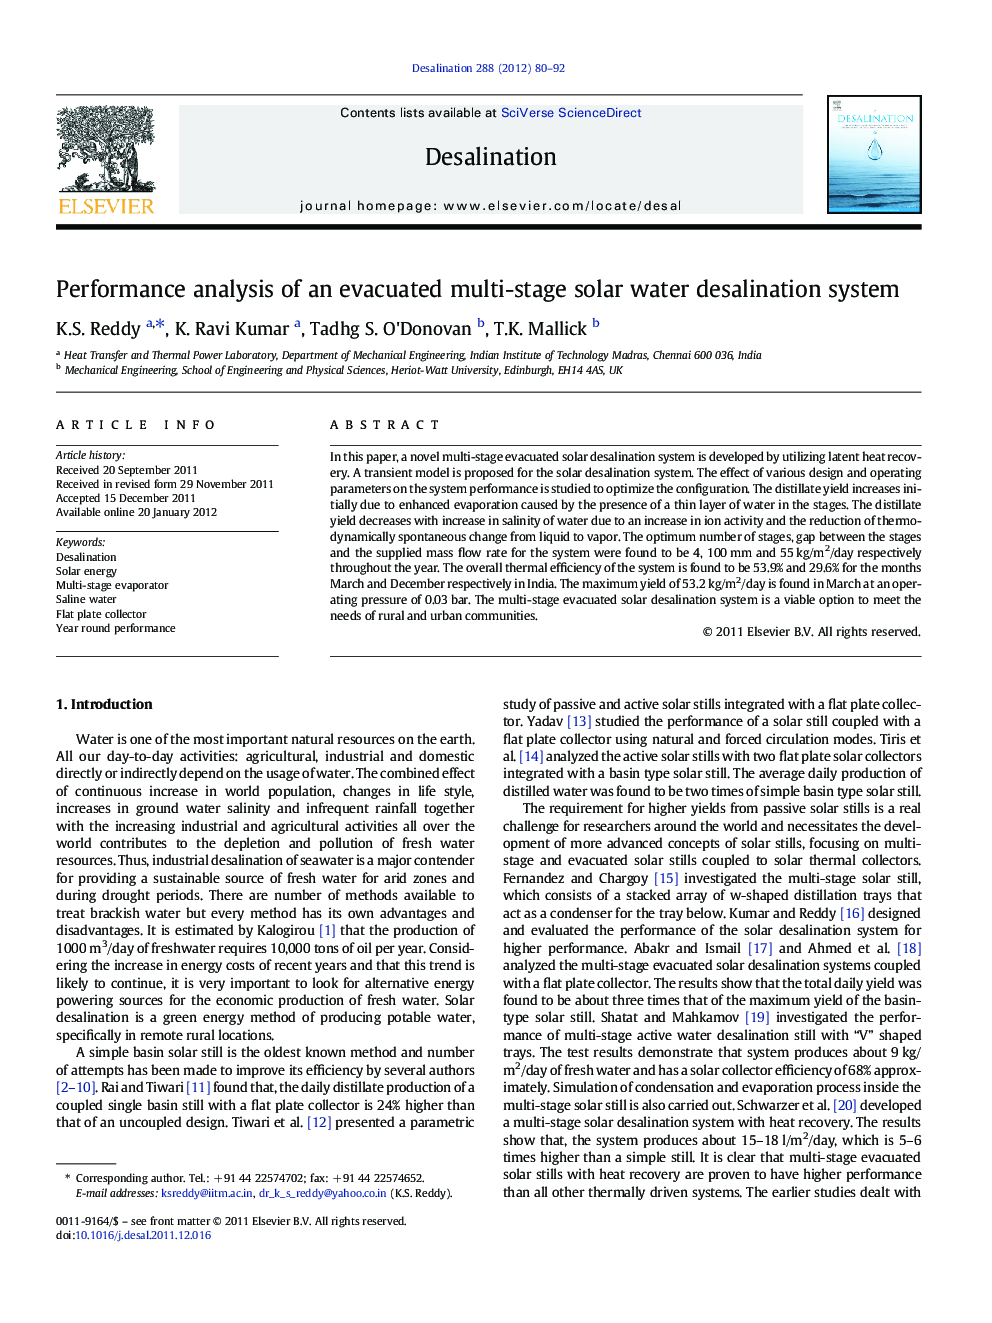 Performance analysis of an evacuated multi-stage solar water desalination system